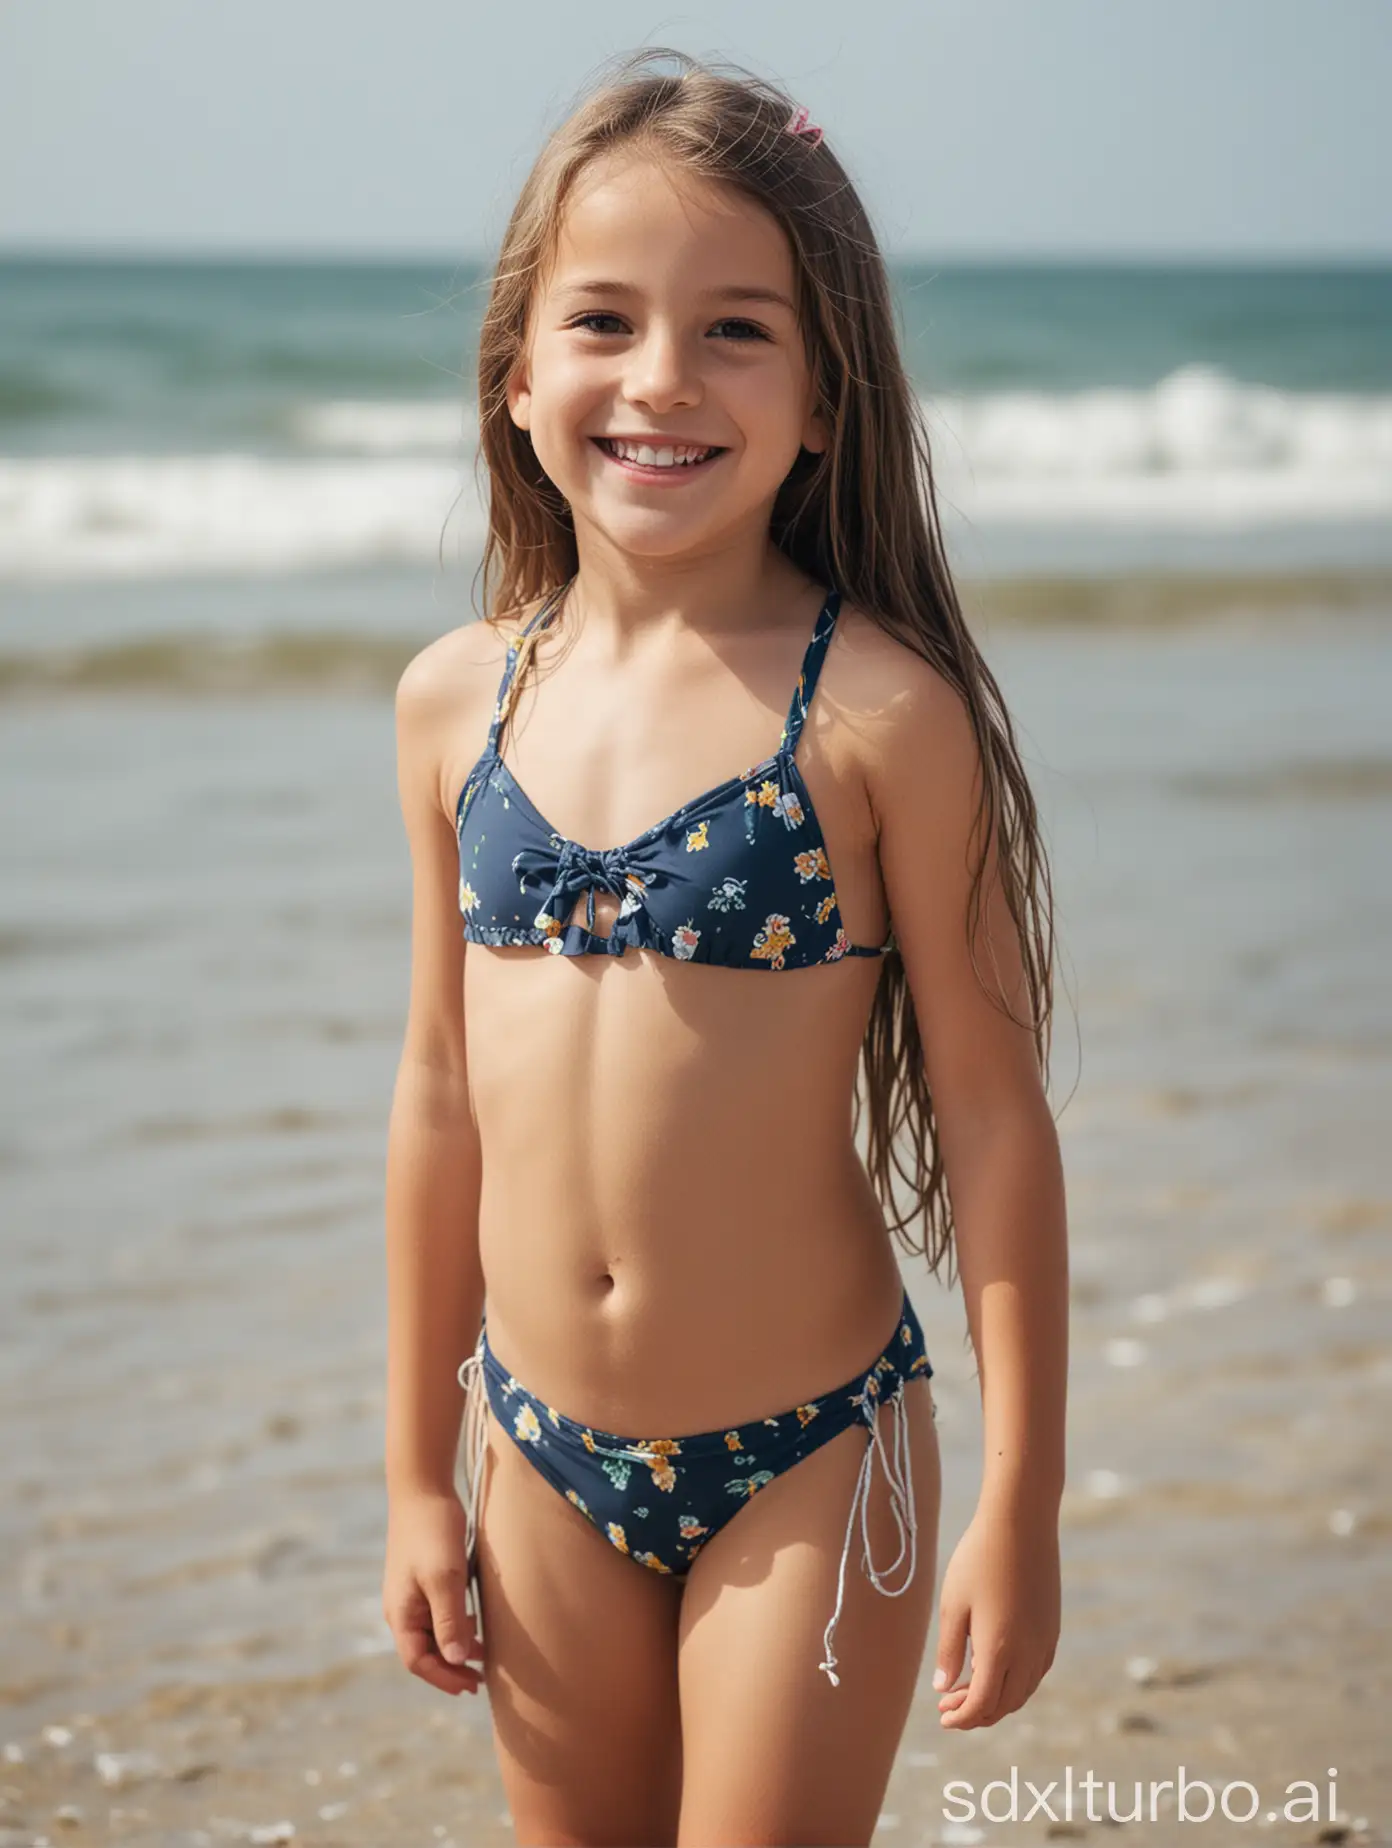 9 years old girl, long hair, string tiny swimsuit, smile, at the beach